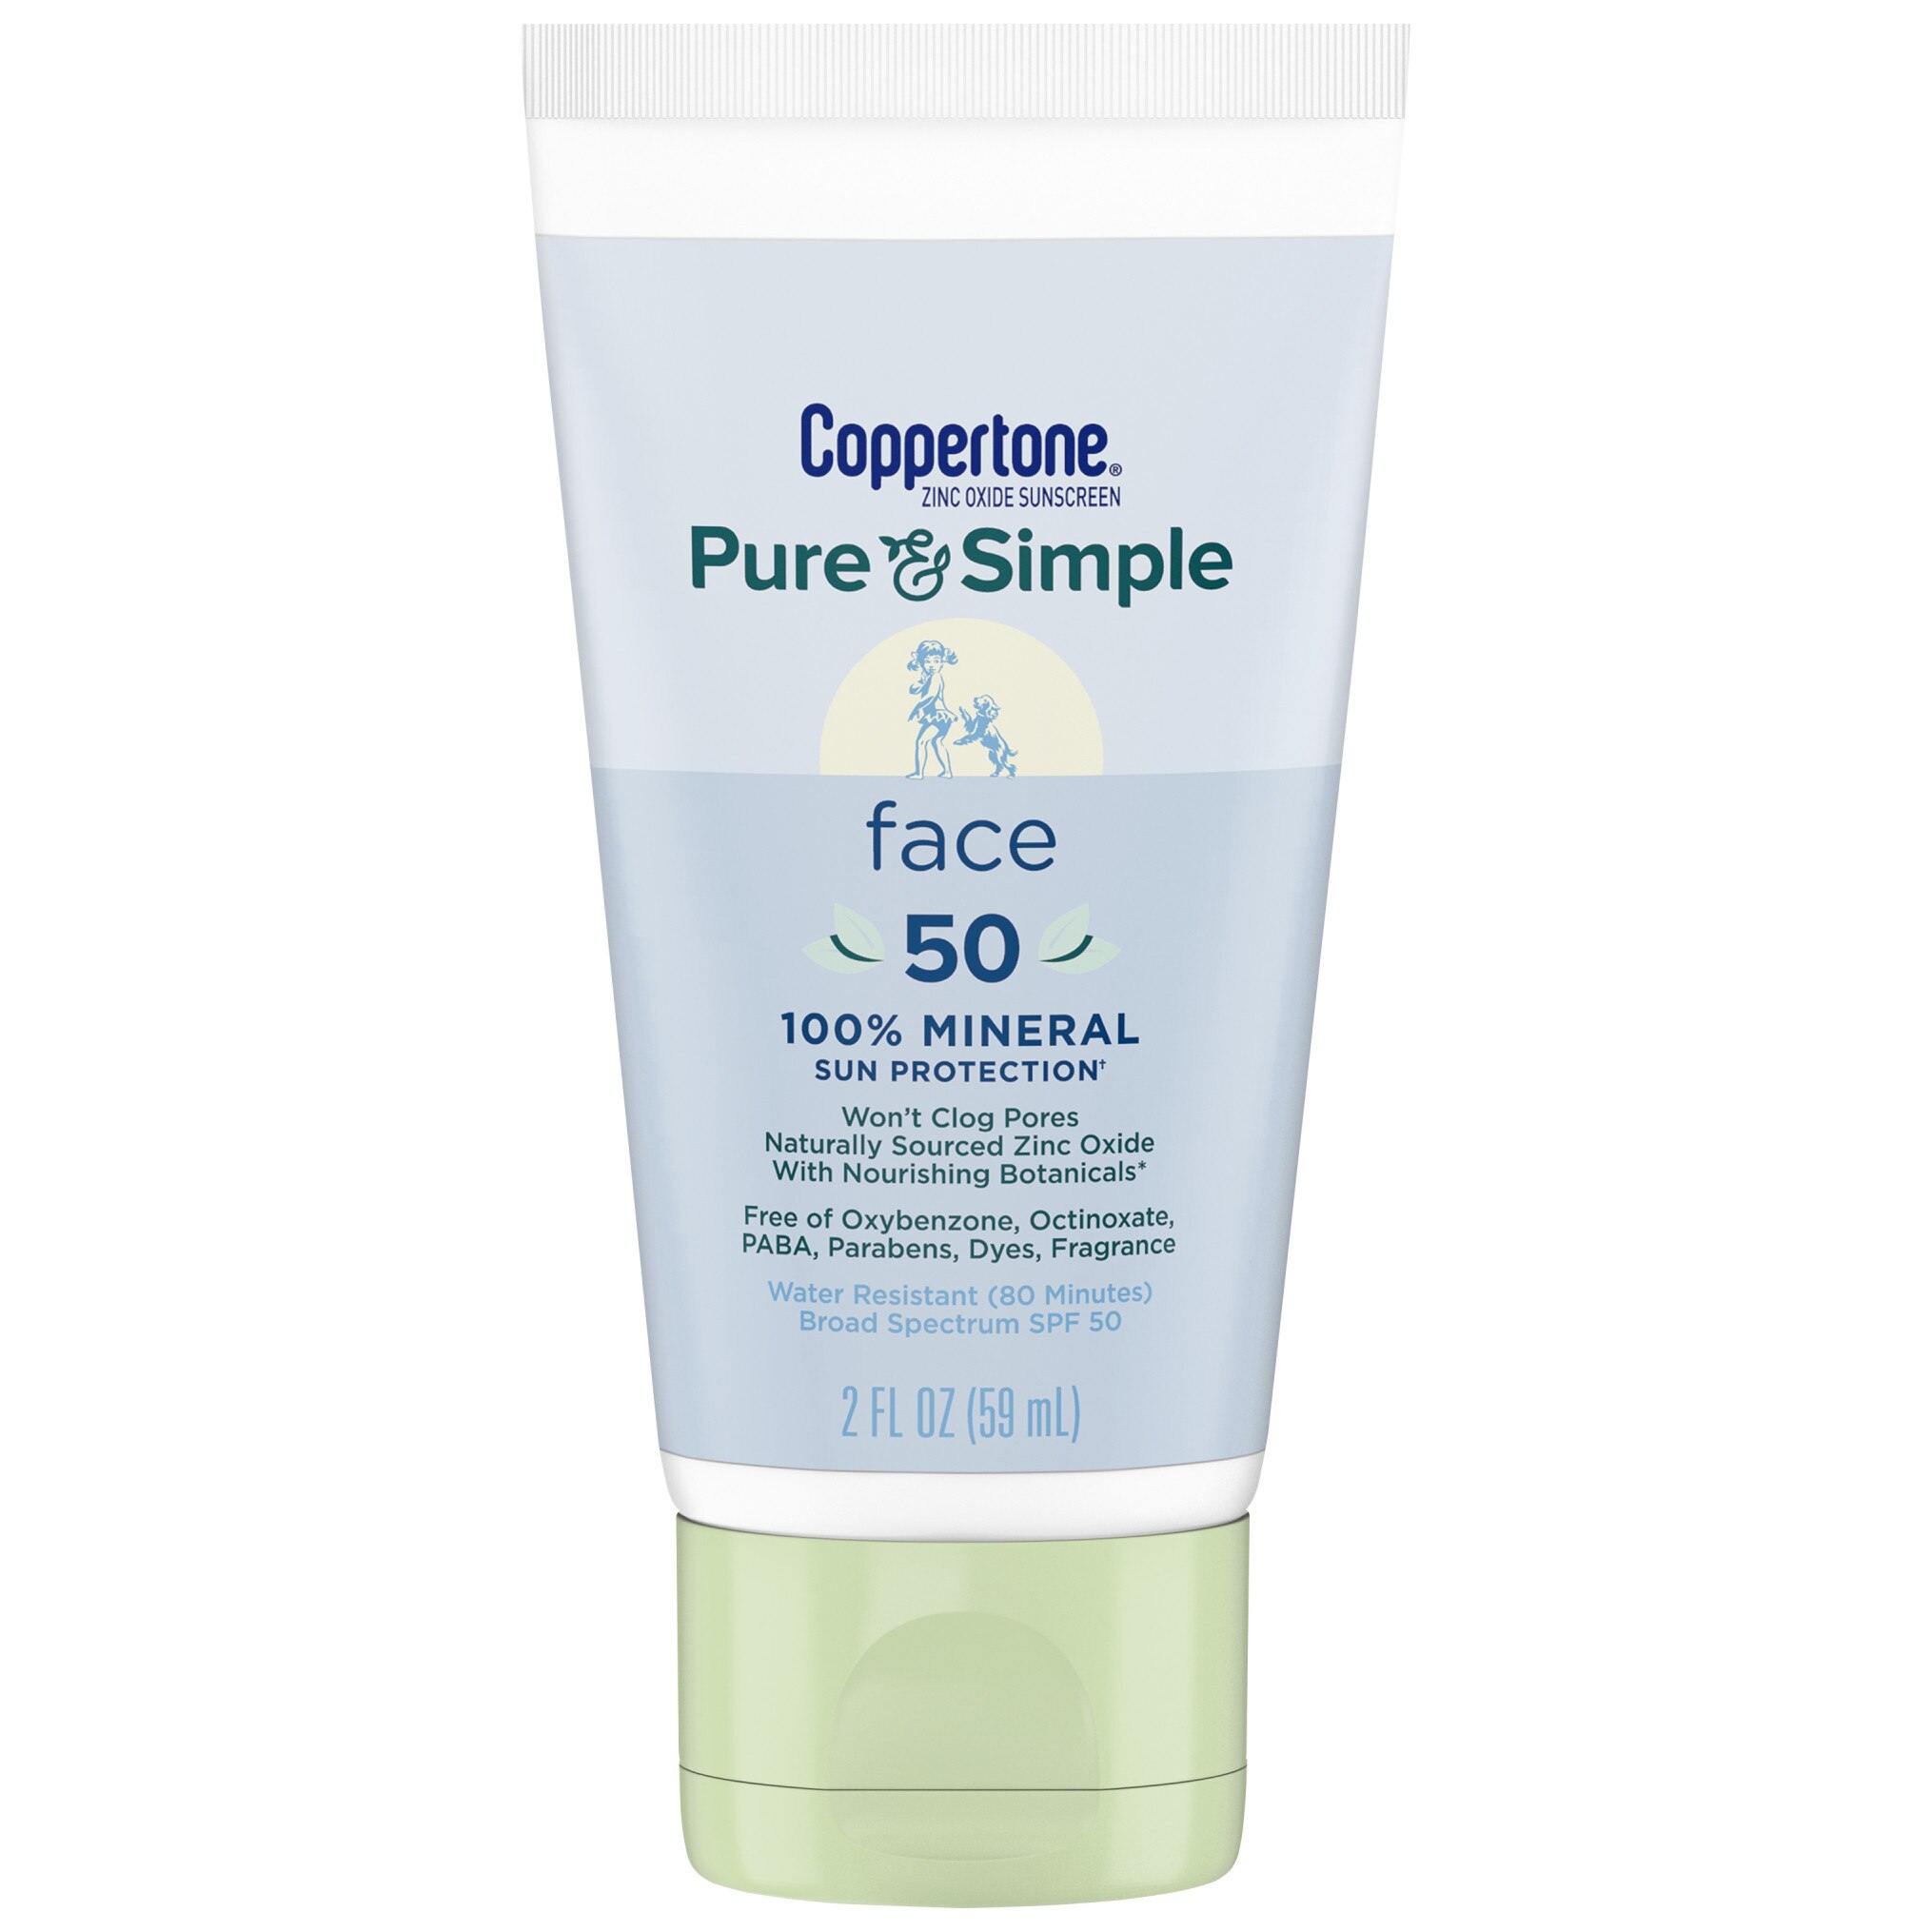 Coppertone Pure and Simple SPF 50 Broad Spectrum Face Sunscreen Lotion with Zinc Oxide, 2 OZ